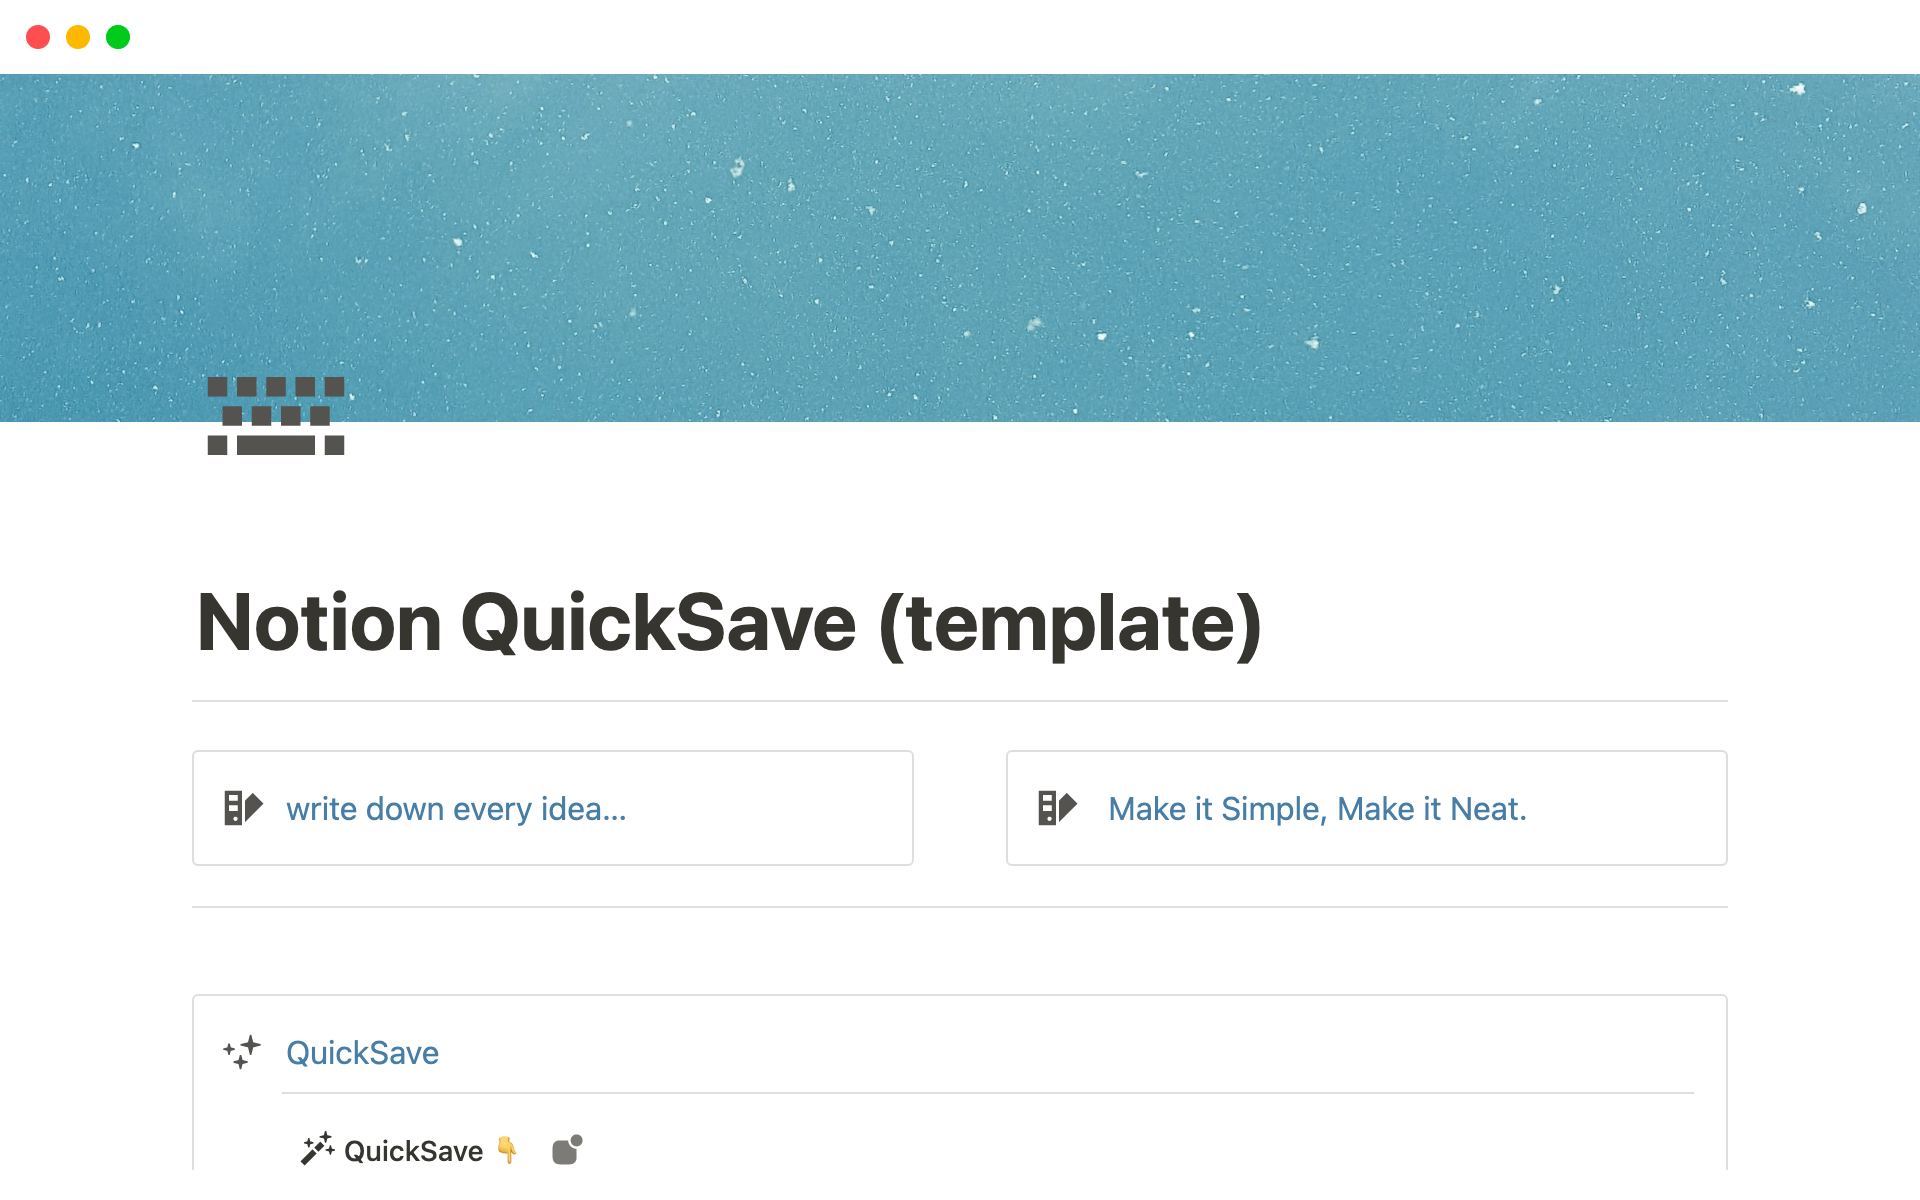 This Notion template allows you to quickly save & organize your notes and tasks in a well-structured way.